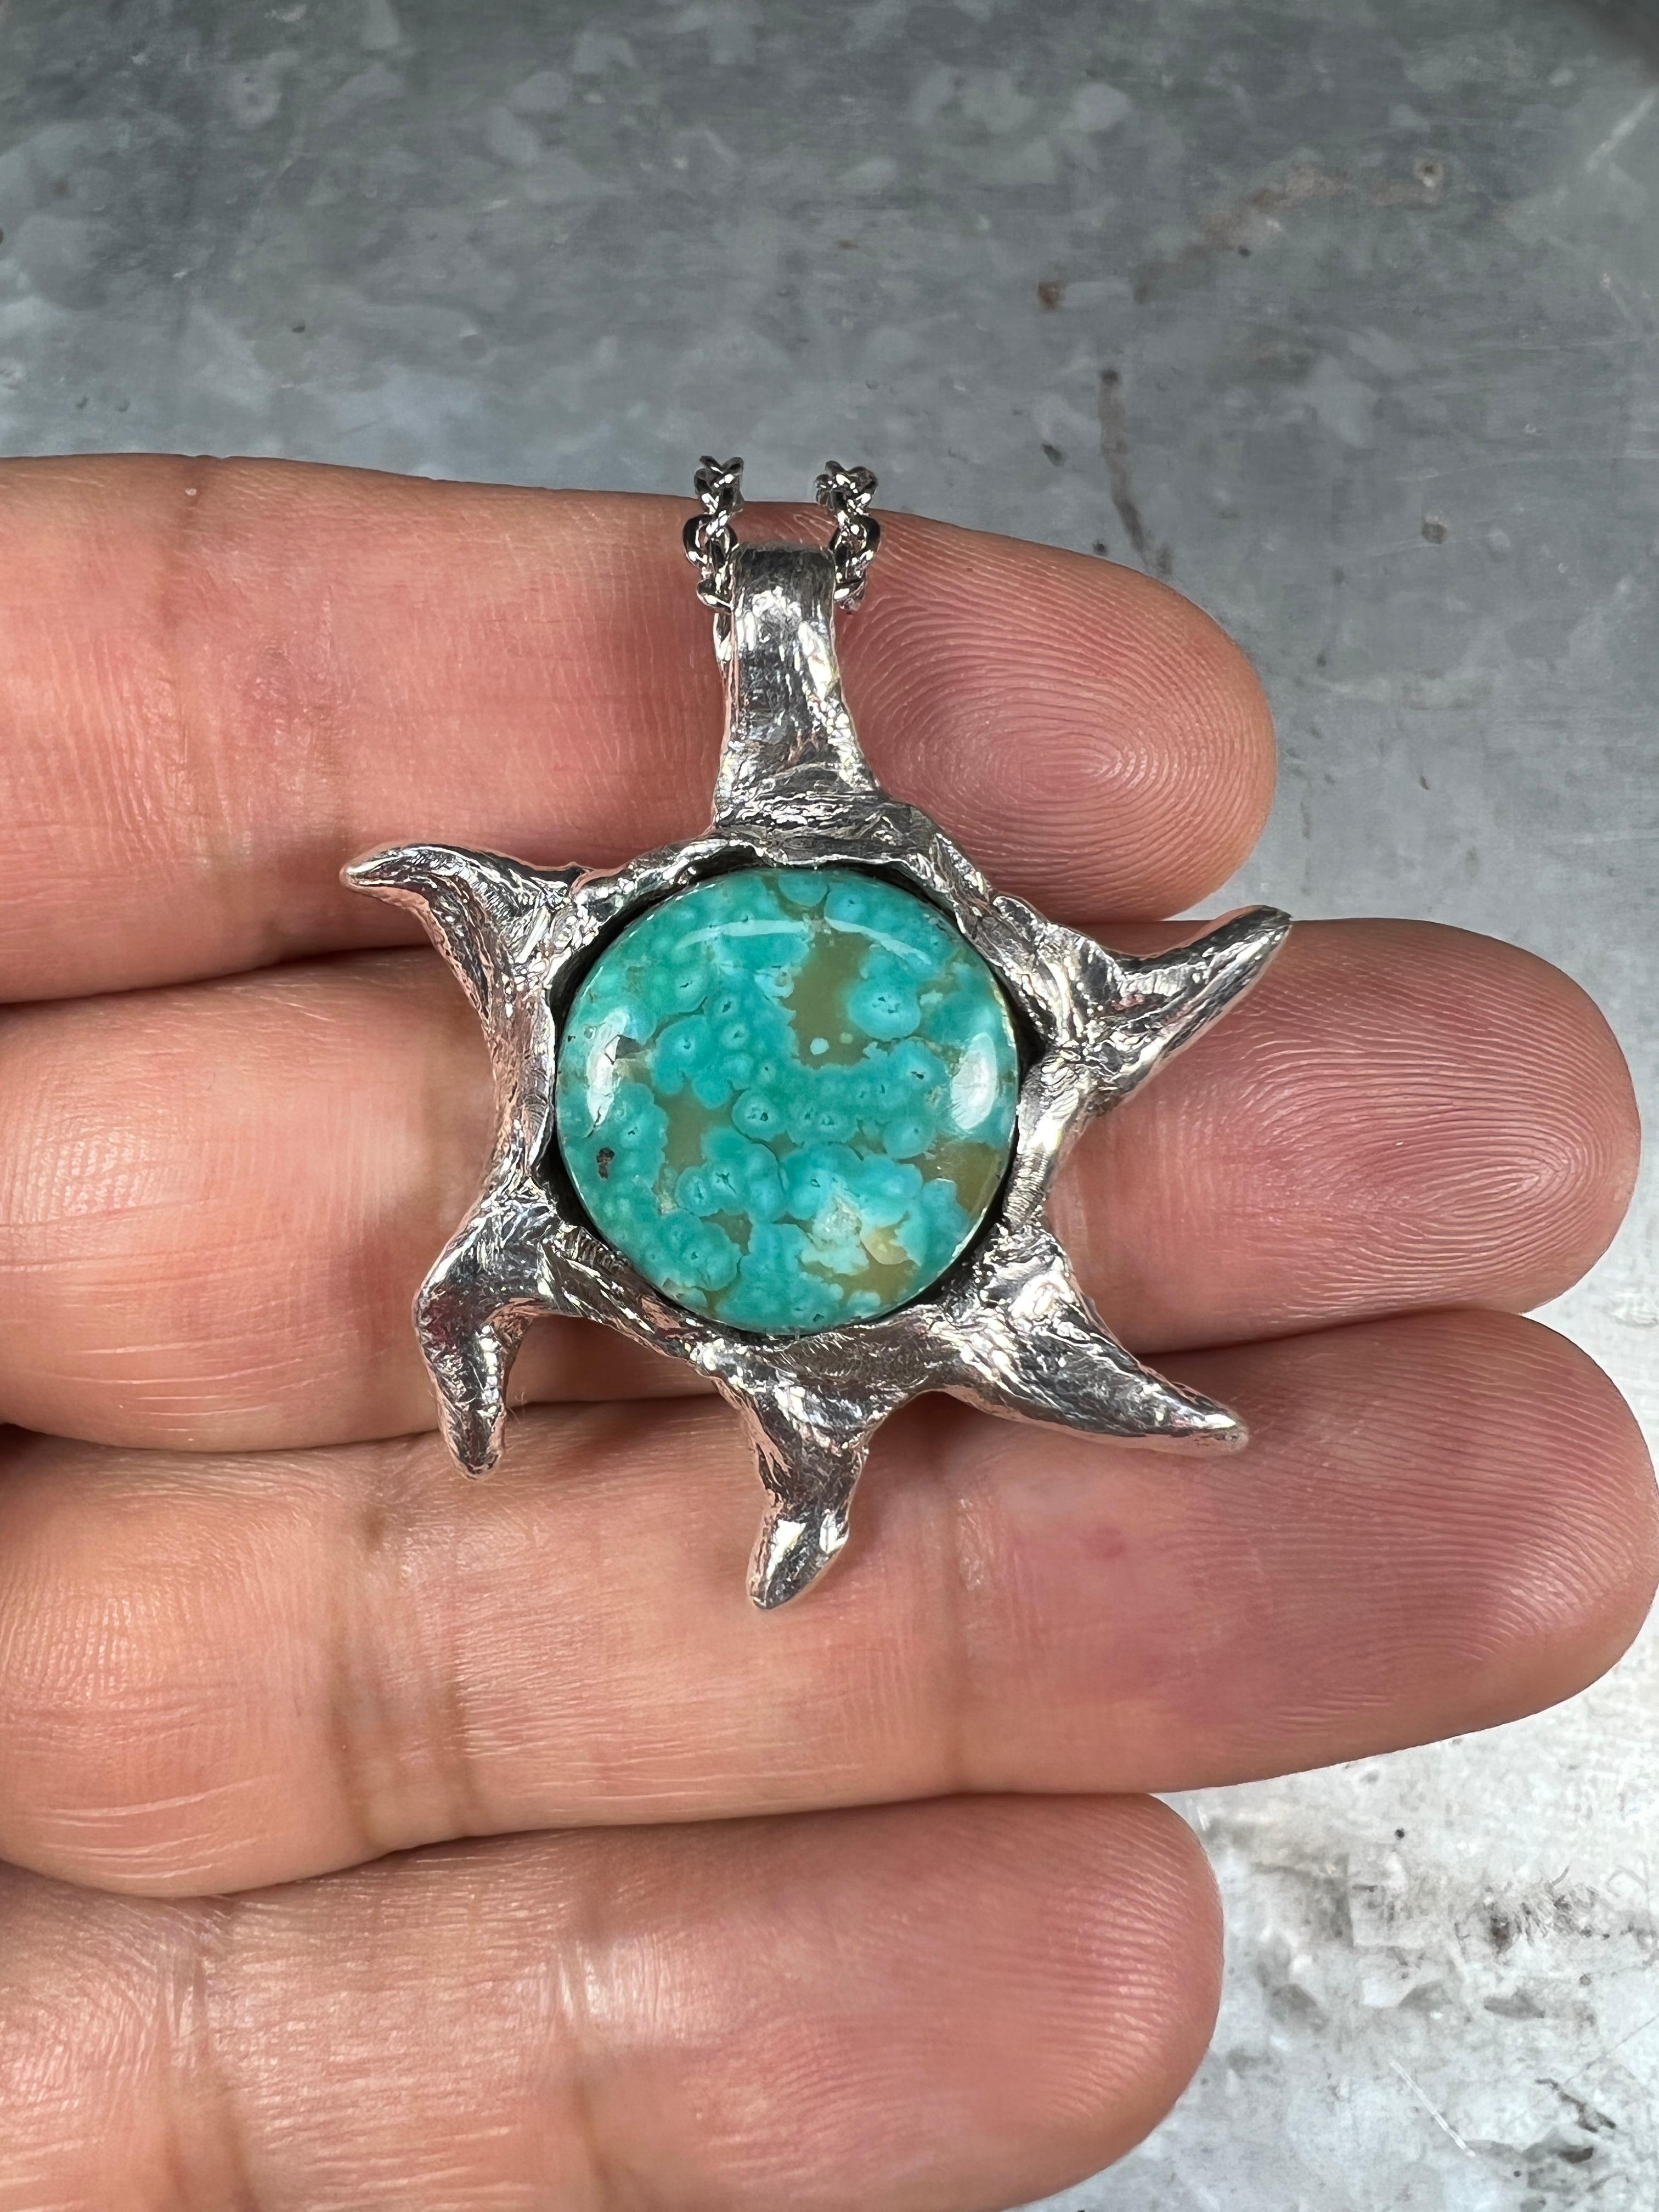 This one-of-a-kind pendant is meticulously hand-carved and cast in sterling silver and features a stunning Manassa Turquoise stone from Colorado. The stone is a perfect complement to the intricate silverwork that depicts the celestial wonder of a